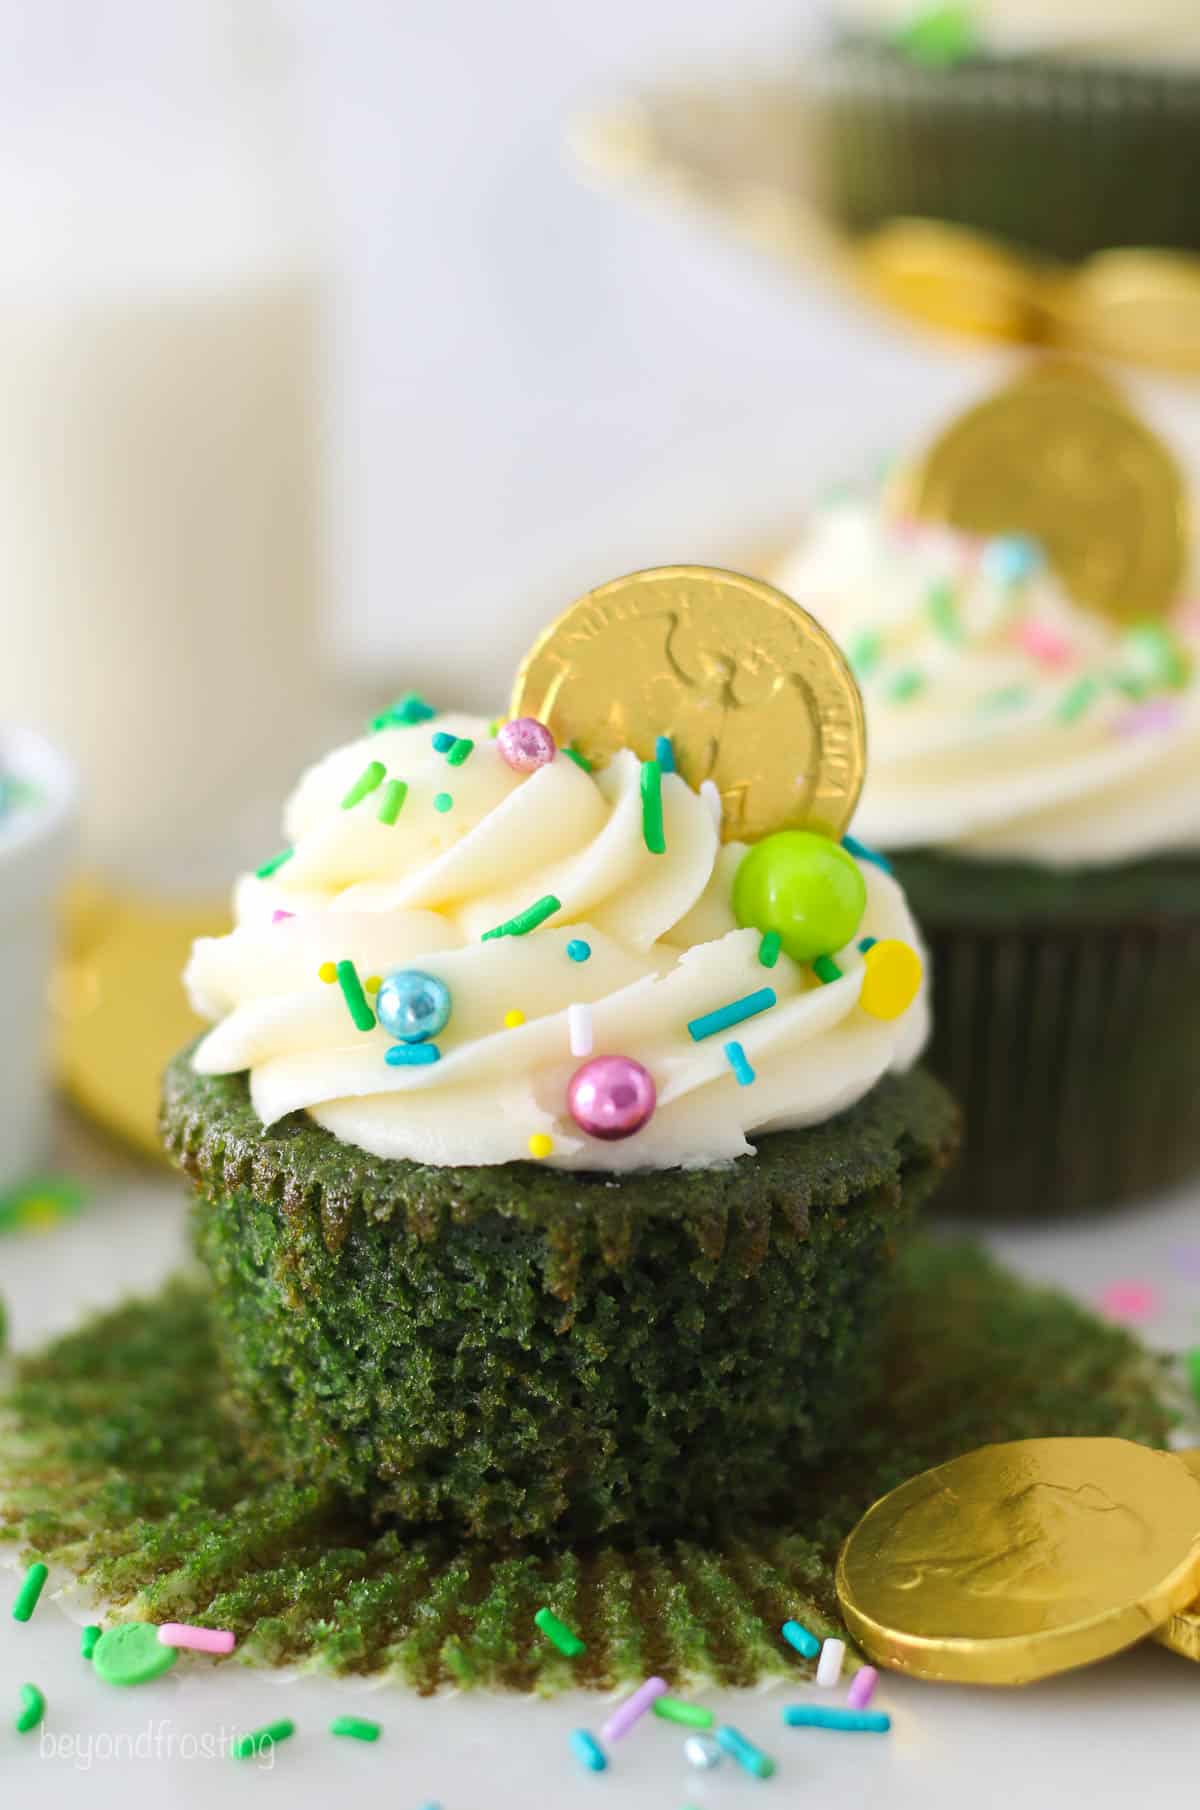 An unwrapped green cupcake topped with sprinkles and a chocolate gold coin